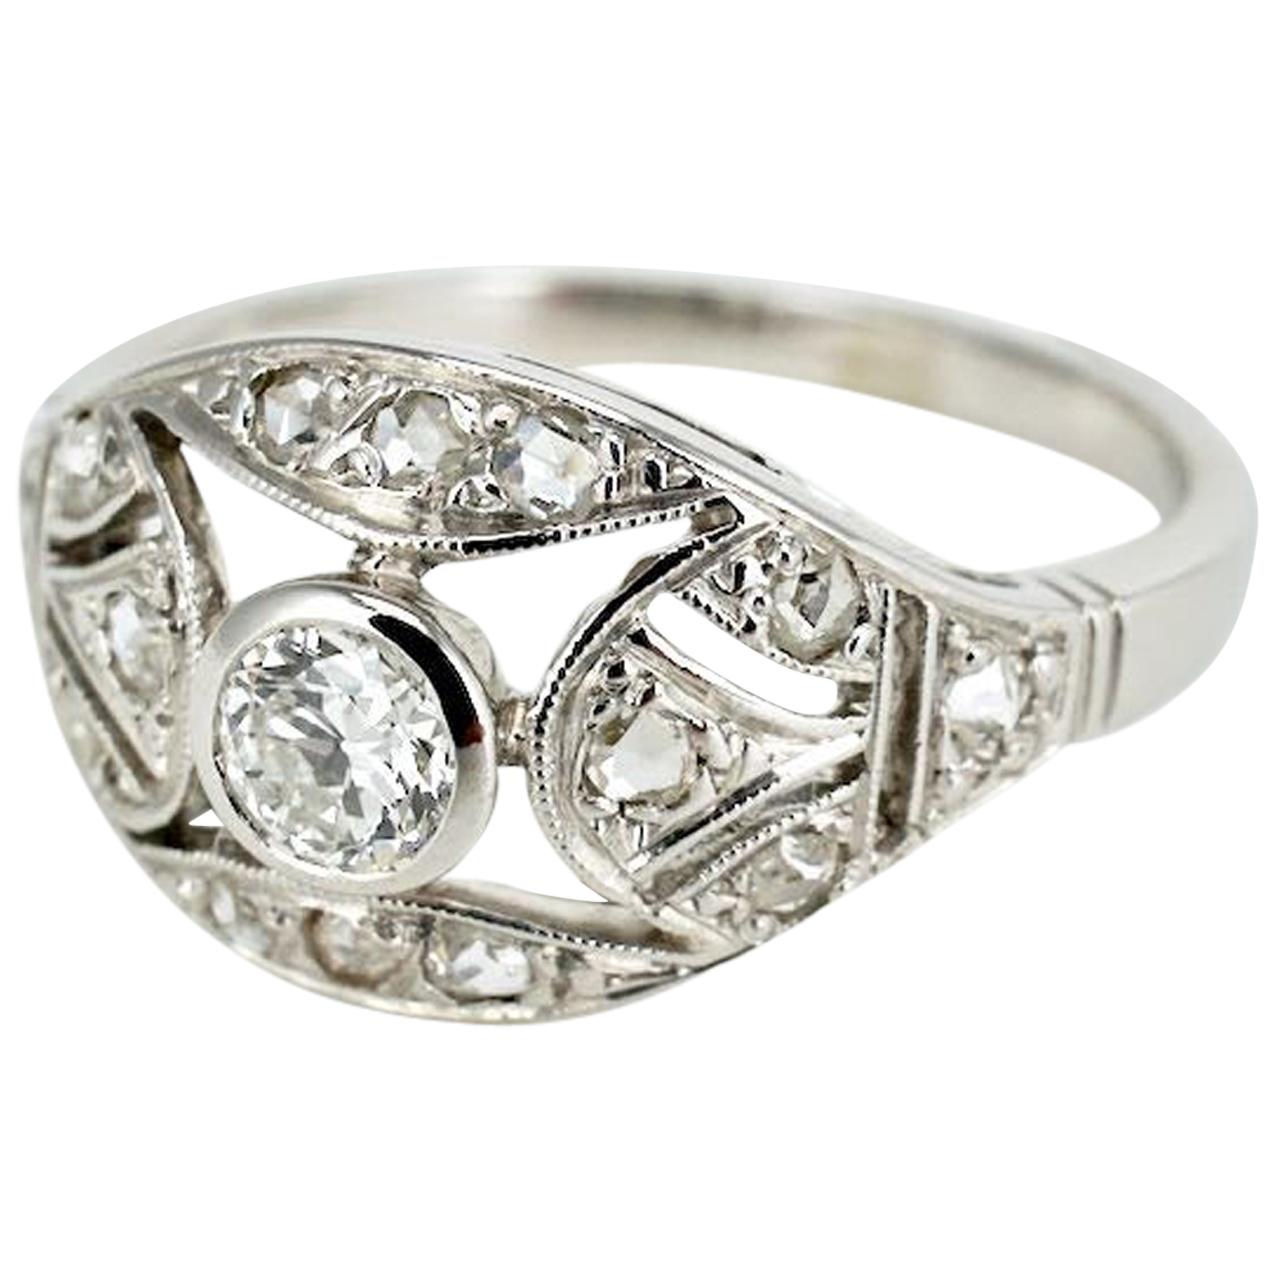 Antique Art Deco Diamond and 18 Karat White Gold Domed Plaque Ring, 1920s For Sale